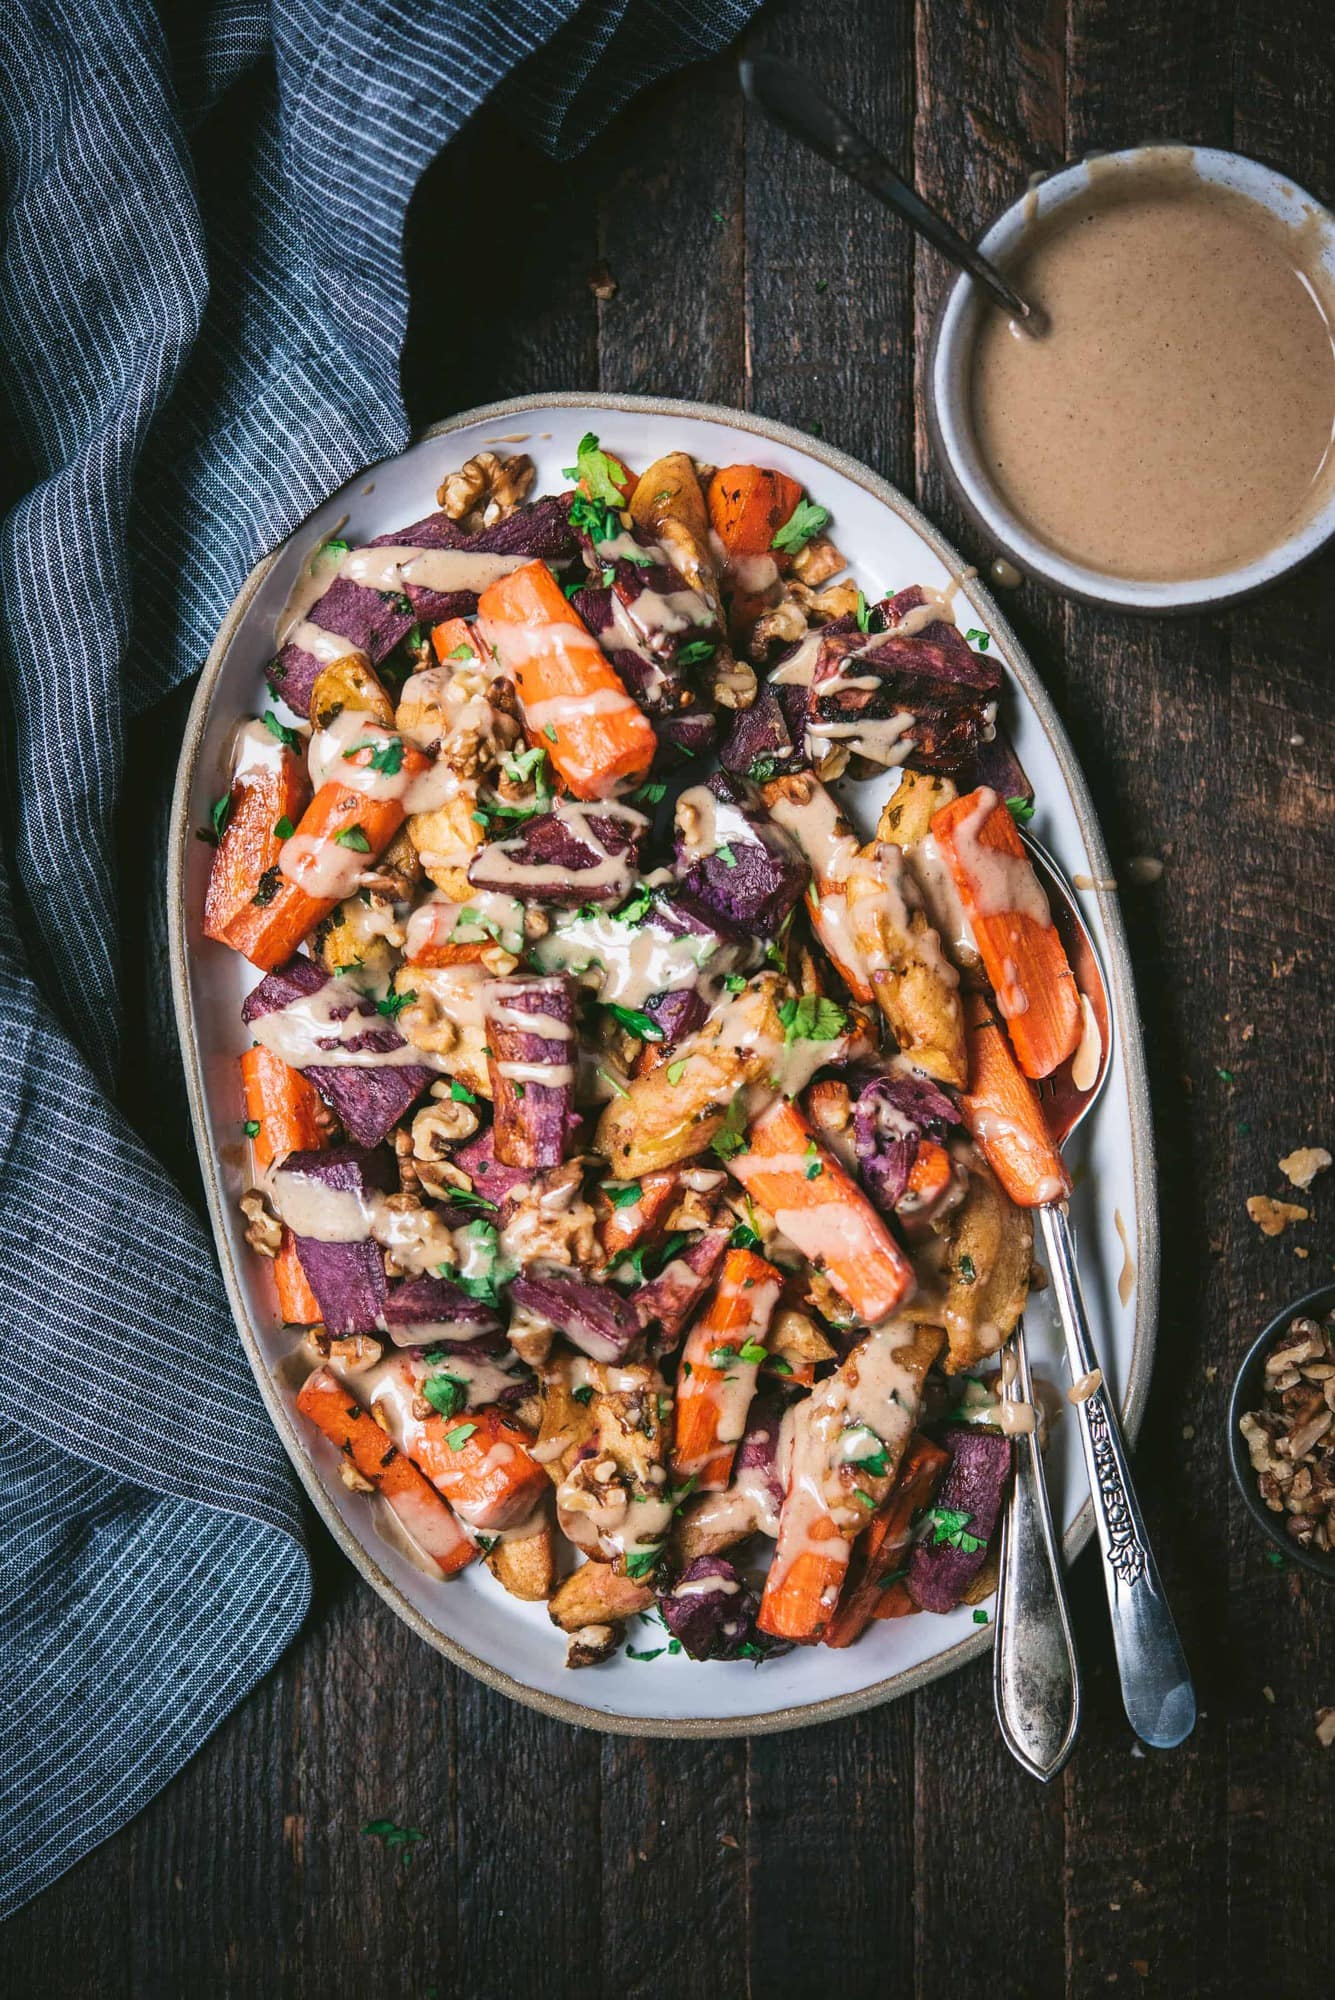 Roast carrots, purple potatoes and apples with cinnamon tahini on a white tray with blue linen